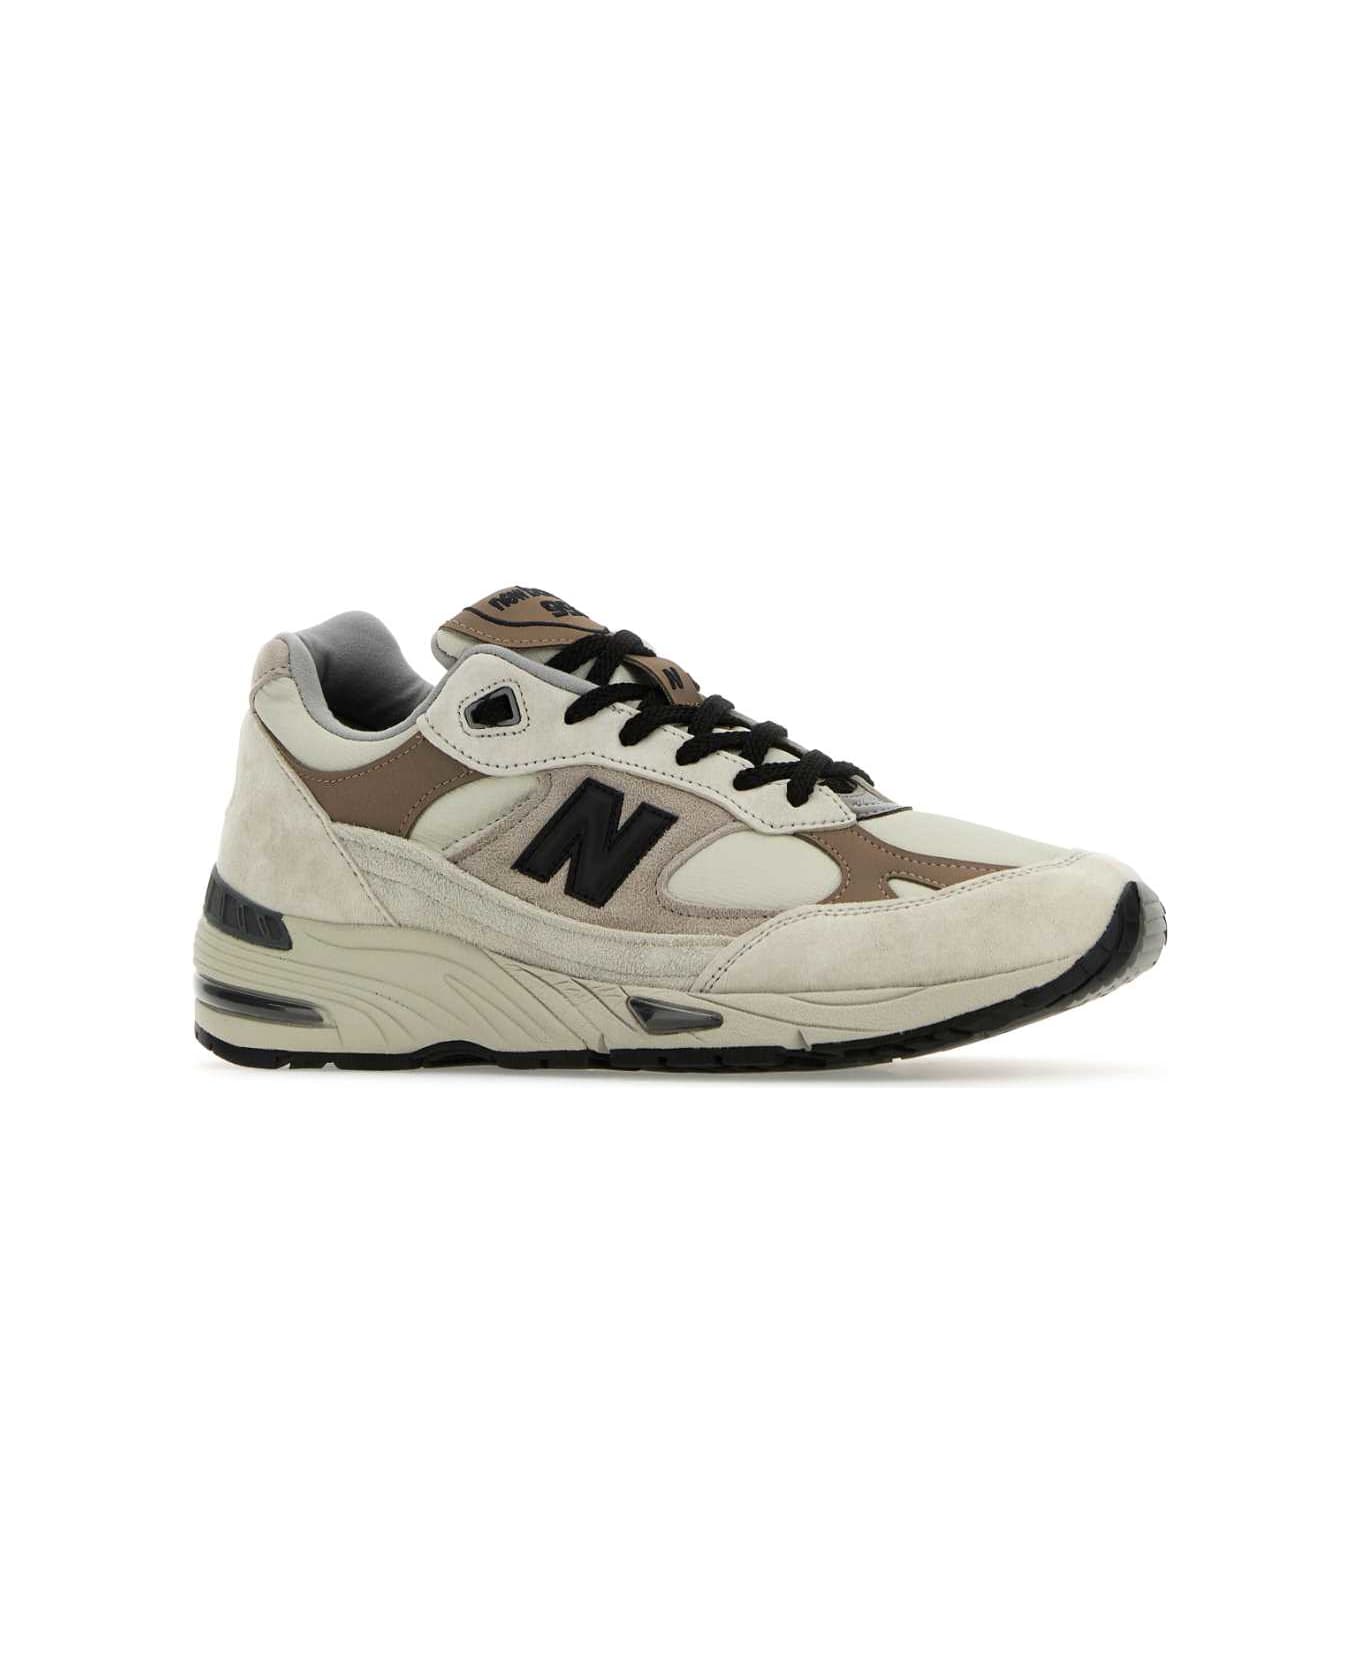 New Balance Multicolor Leather And Fabric Made In Usa 991 Sneakers - BEIGE スニーカー